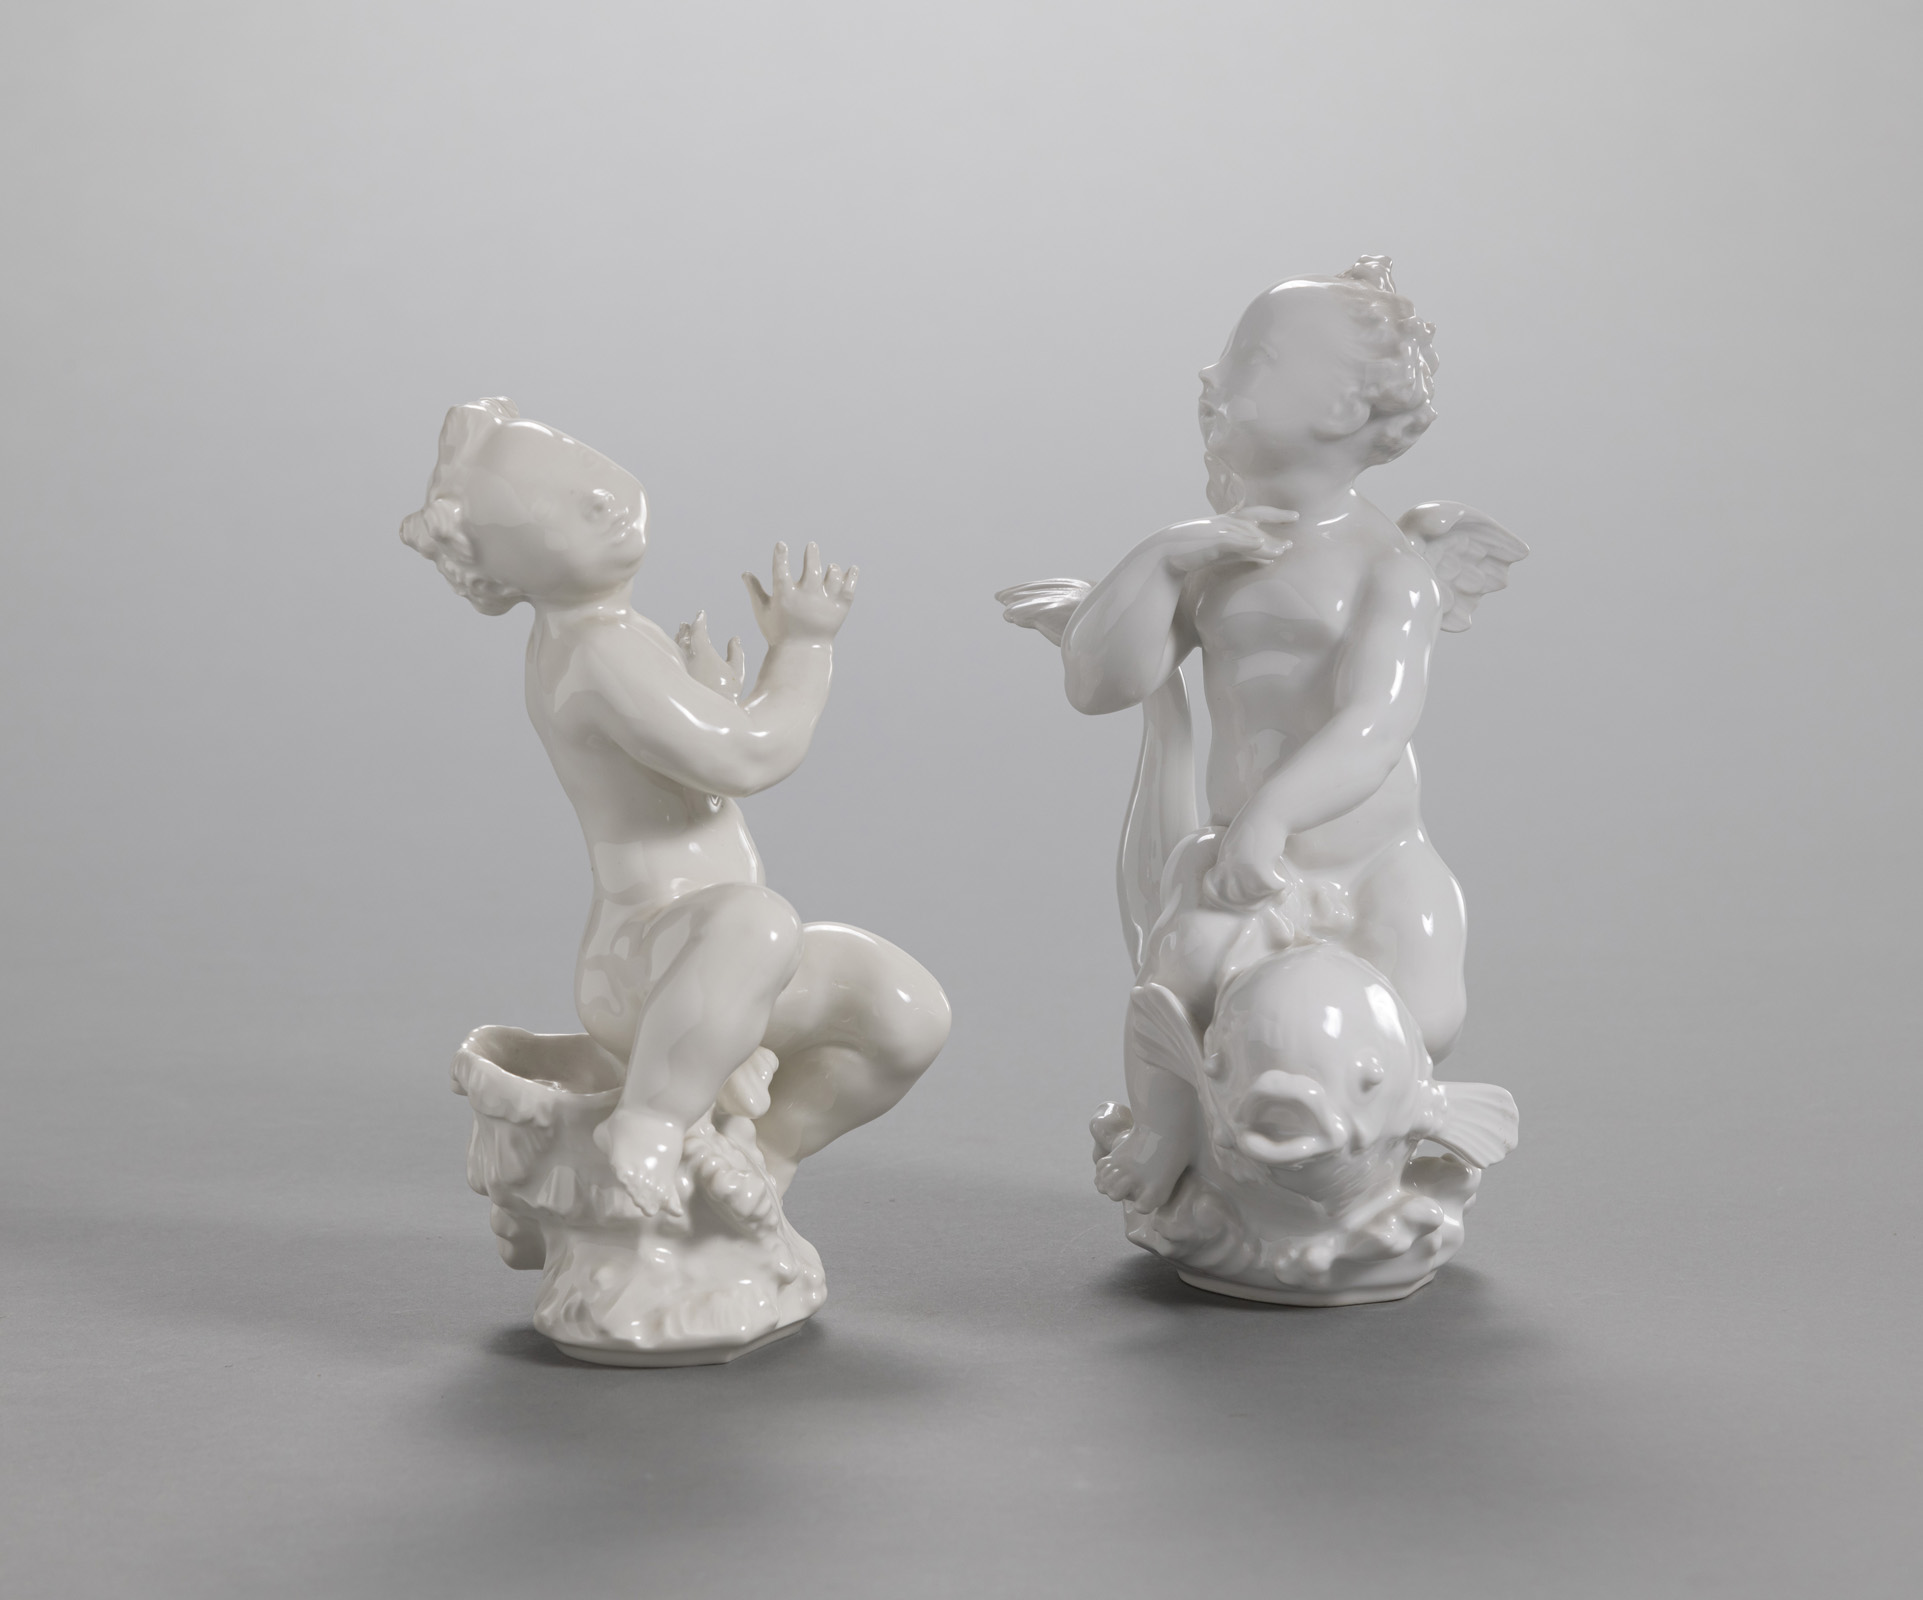 TWO PUTTI FROM THE CENTRE PIECE "THE BIRTH OF BEAUTY" - Image 3 of 5